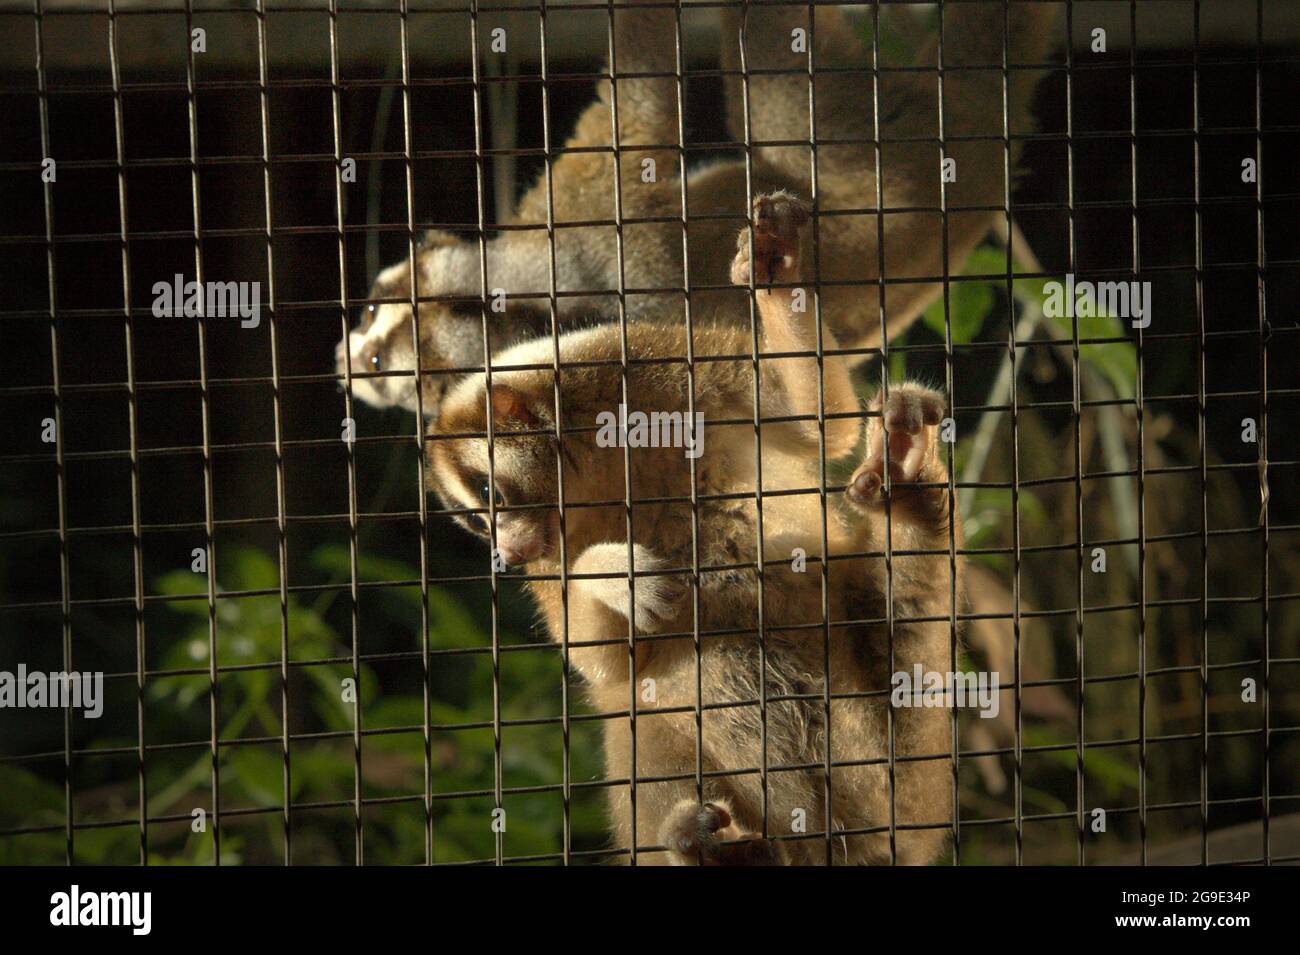 Slow lorises at wildlife rehabilitation centre facility operated by International Animal Rescue (IAR) in Ciapus, Bogor, West Java, Indonesia. The primates were rescued from wildlife trade activity and are in a transition phase, which is to make them ready to be released into the wild. Slow loris is a nocturnal species, venomous, and could transmit zoonotic diseases to human. The primates do not have characteristics as pets, according to scientists, so they will be likely dead in human captivity. Stock Photo